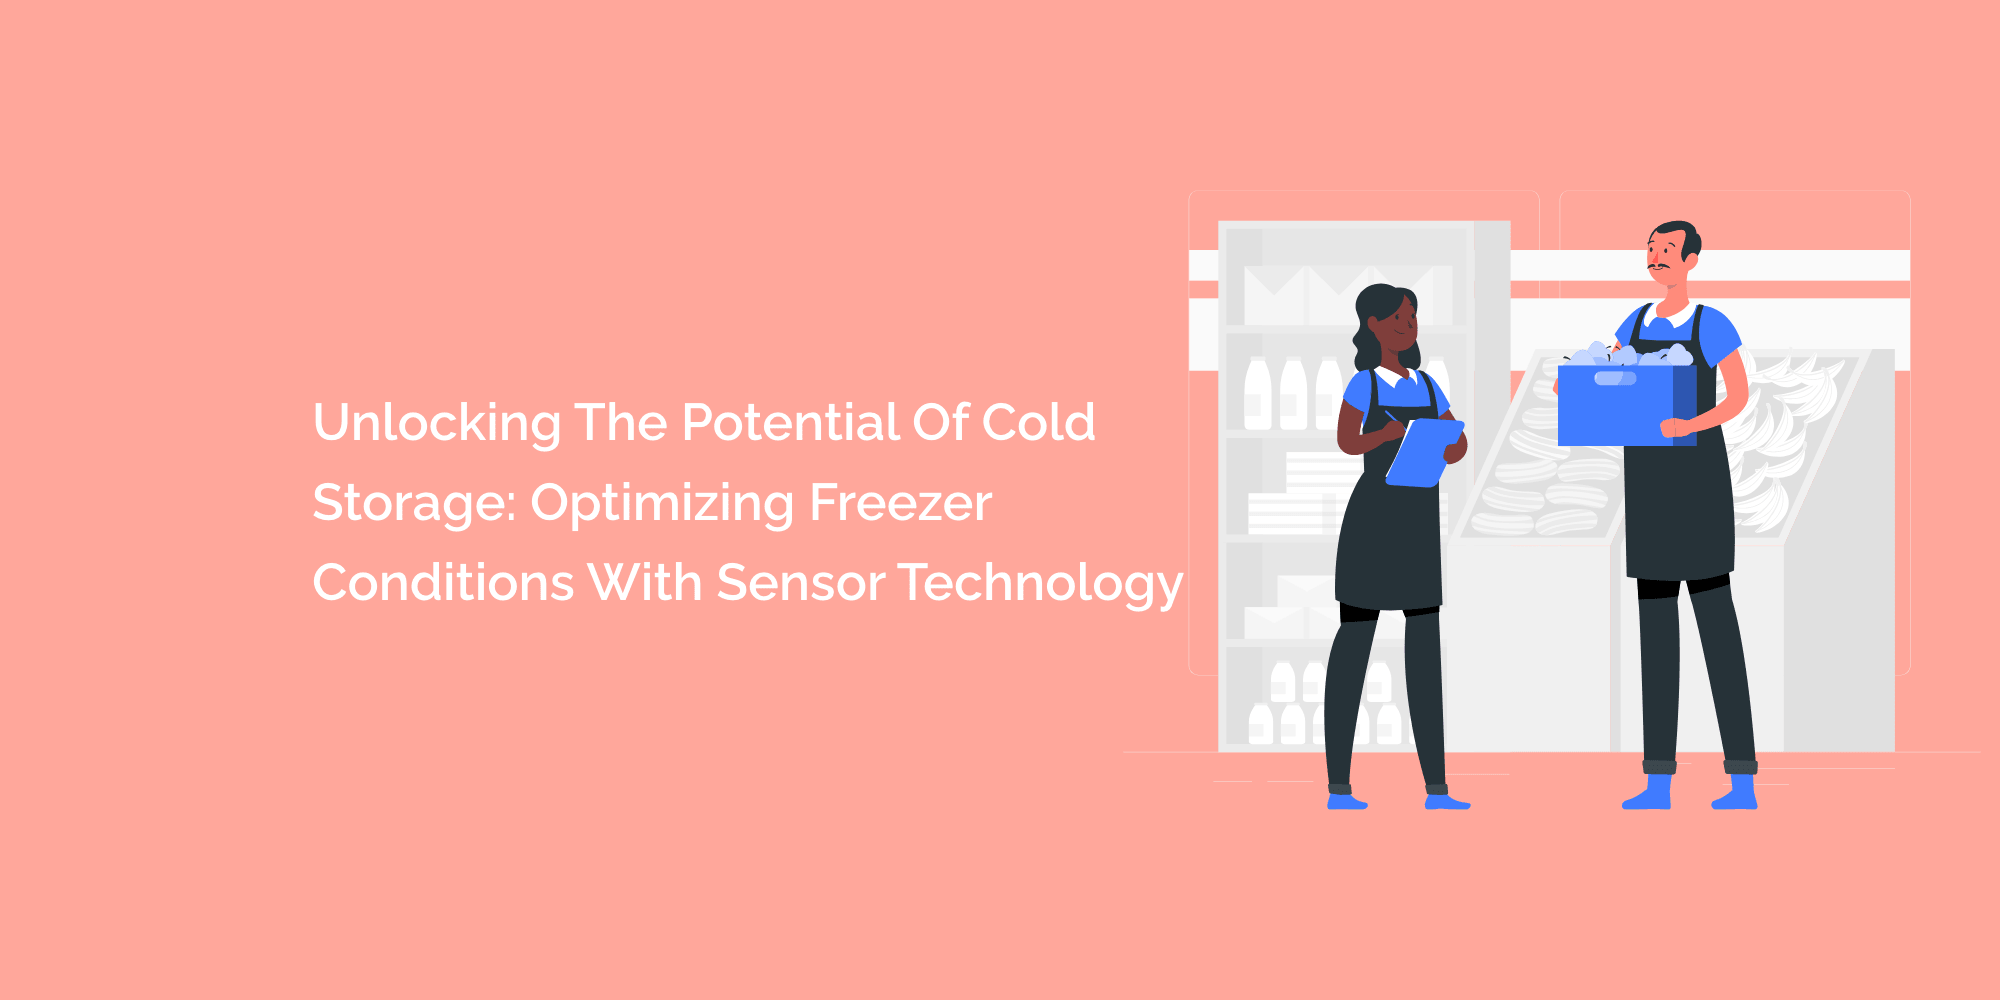 Unlocking the Potential of Cold Storage: Optimizing Freezer Conditions with Sensor Technology